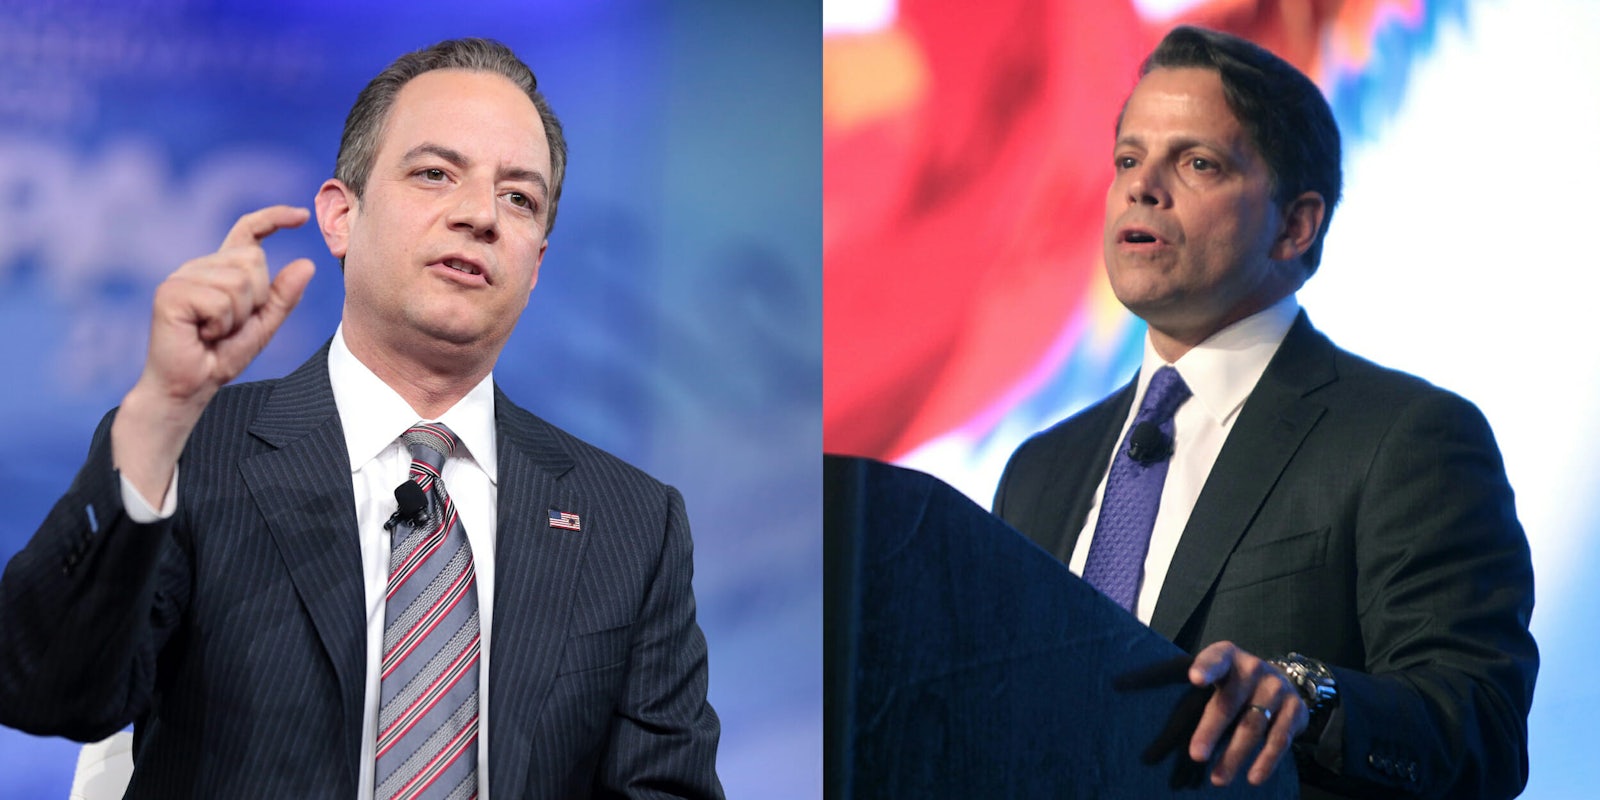 Anthony Scaramucci and Reince Priebus,